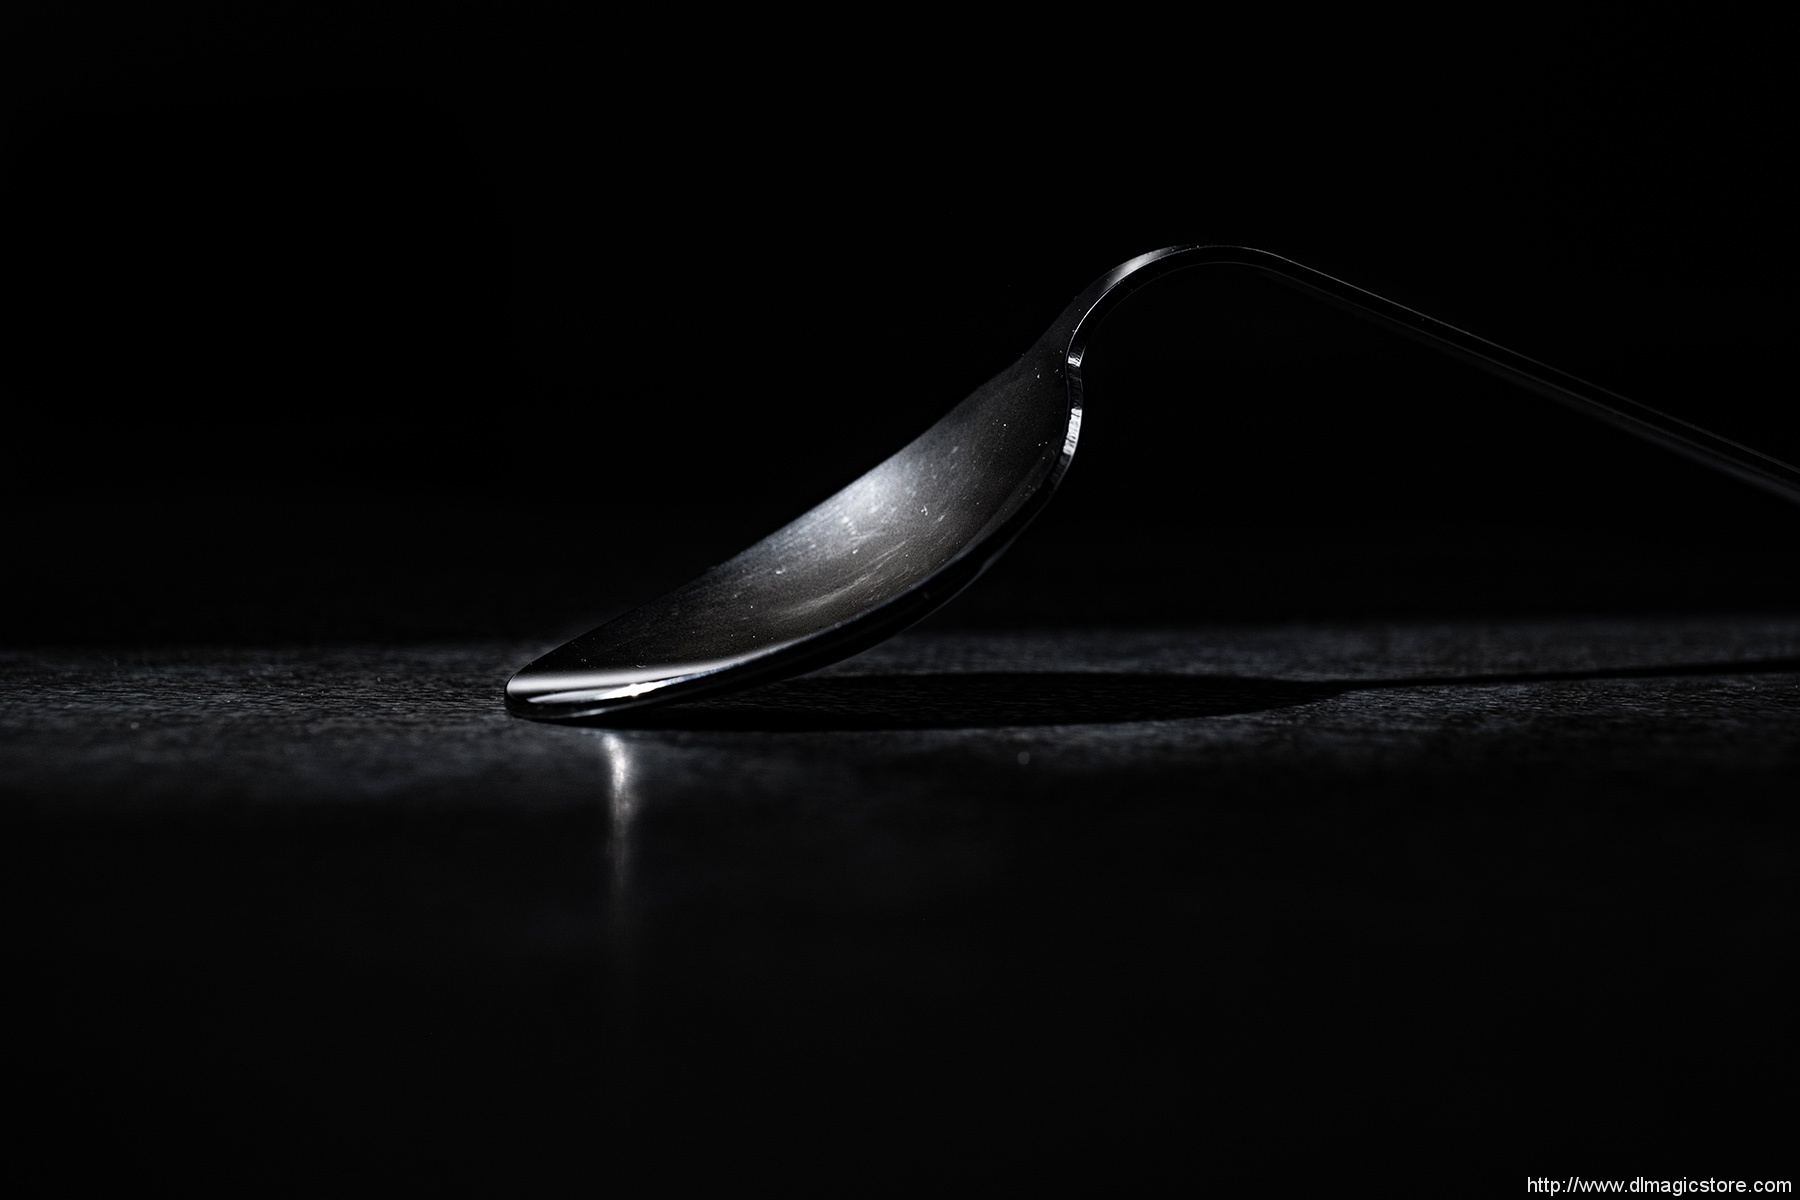 Shift Spoon by Ellusionist